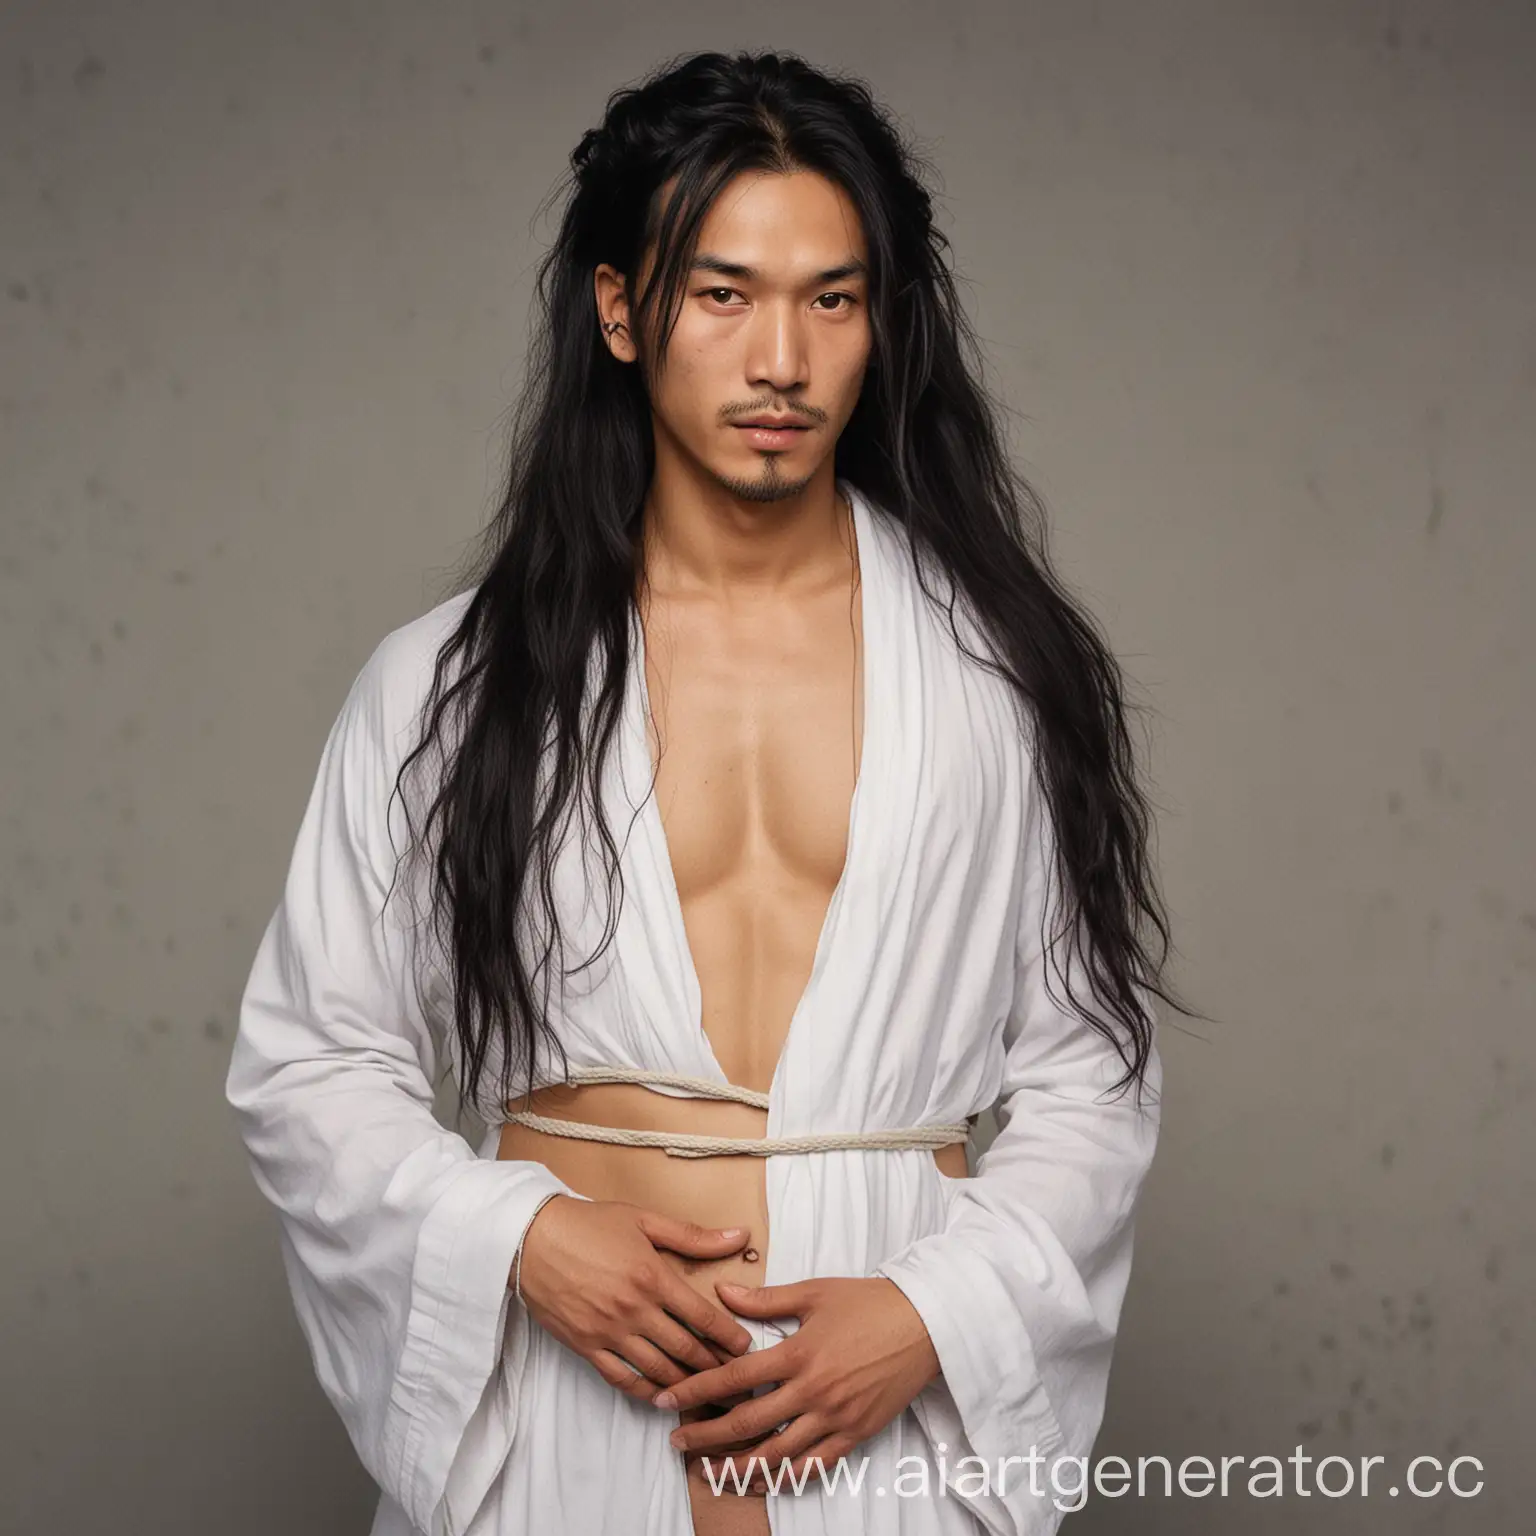 Pregnant-Gypsy-Chinese-Man-in-White-Robe-with-Bandaged-Hands-and-Ponytail